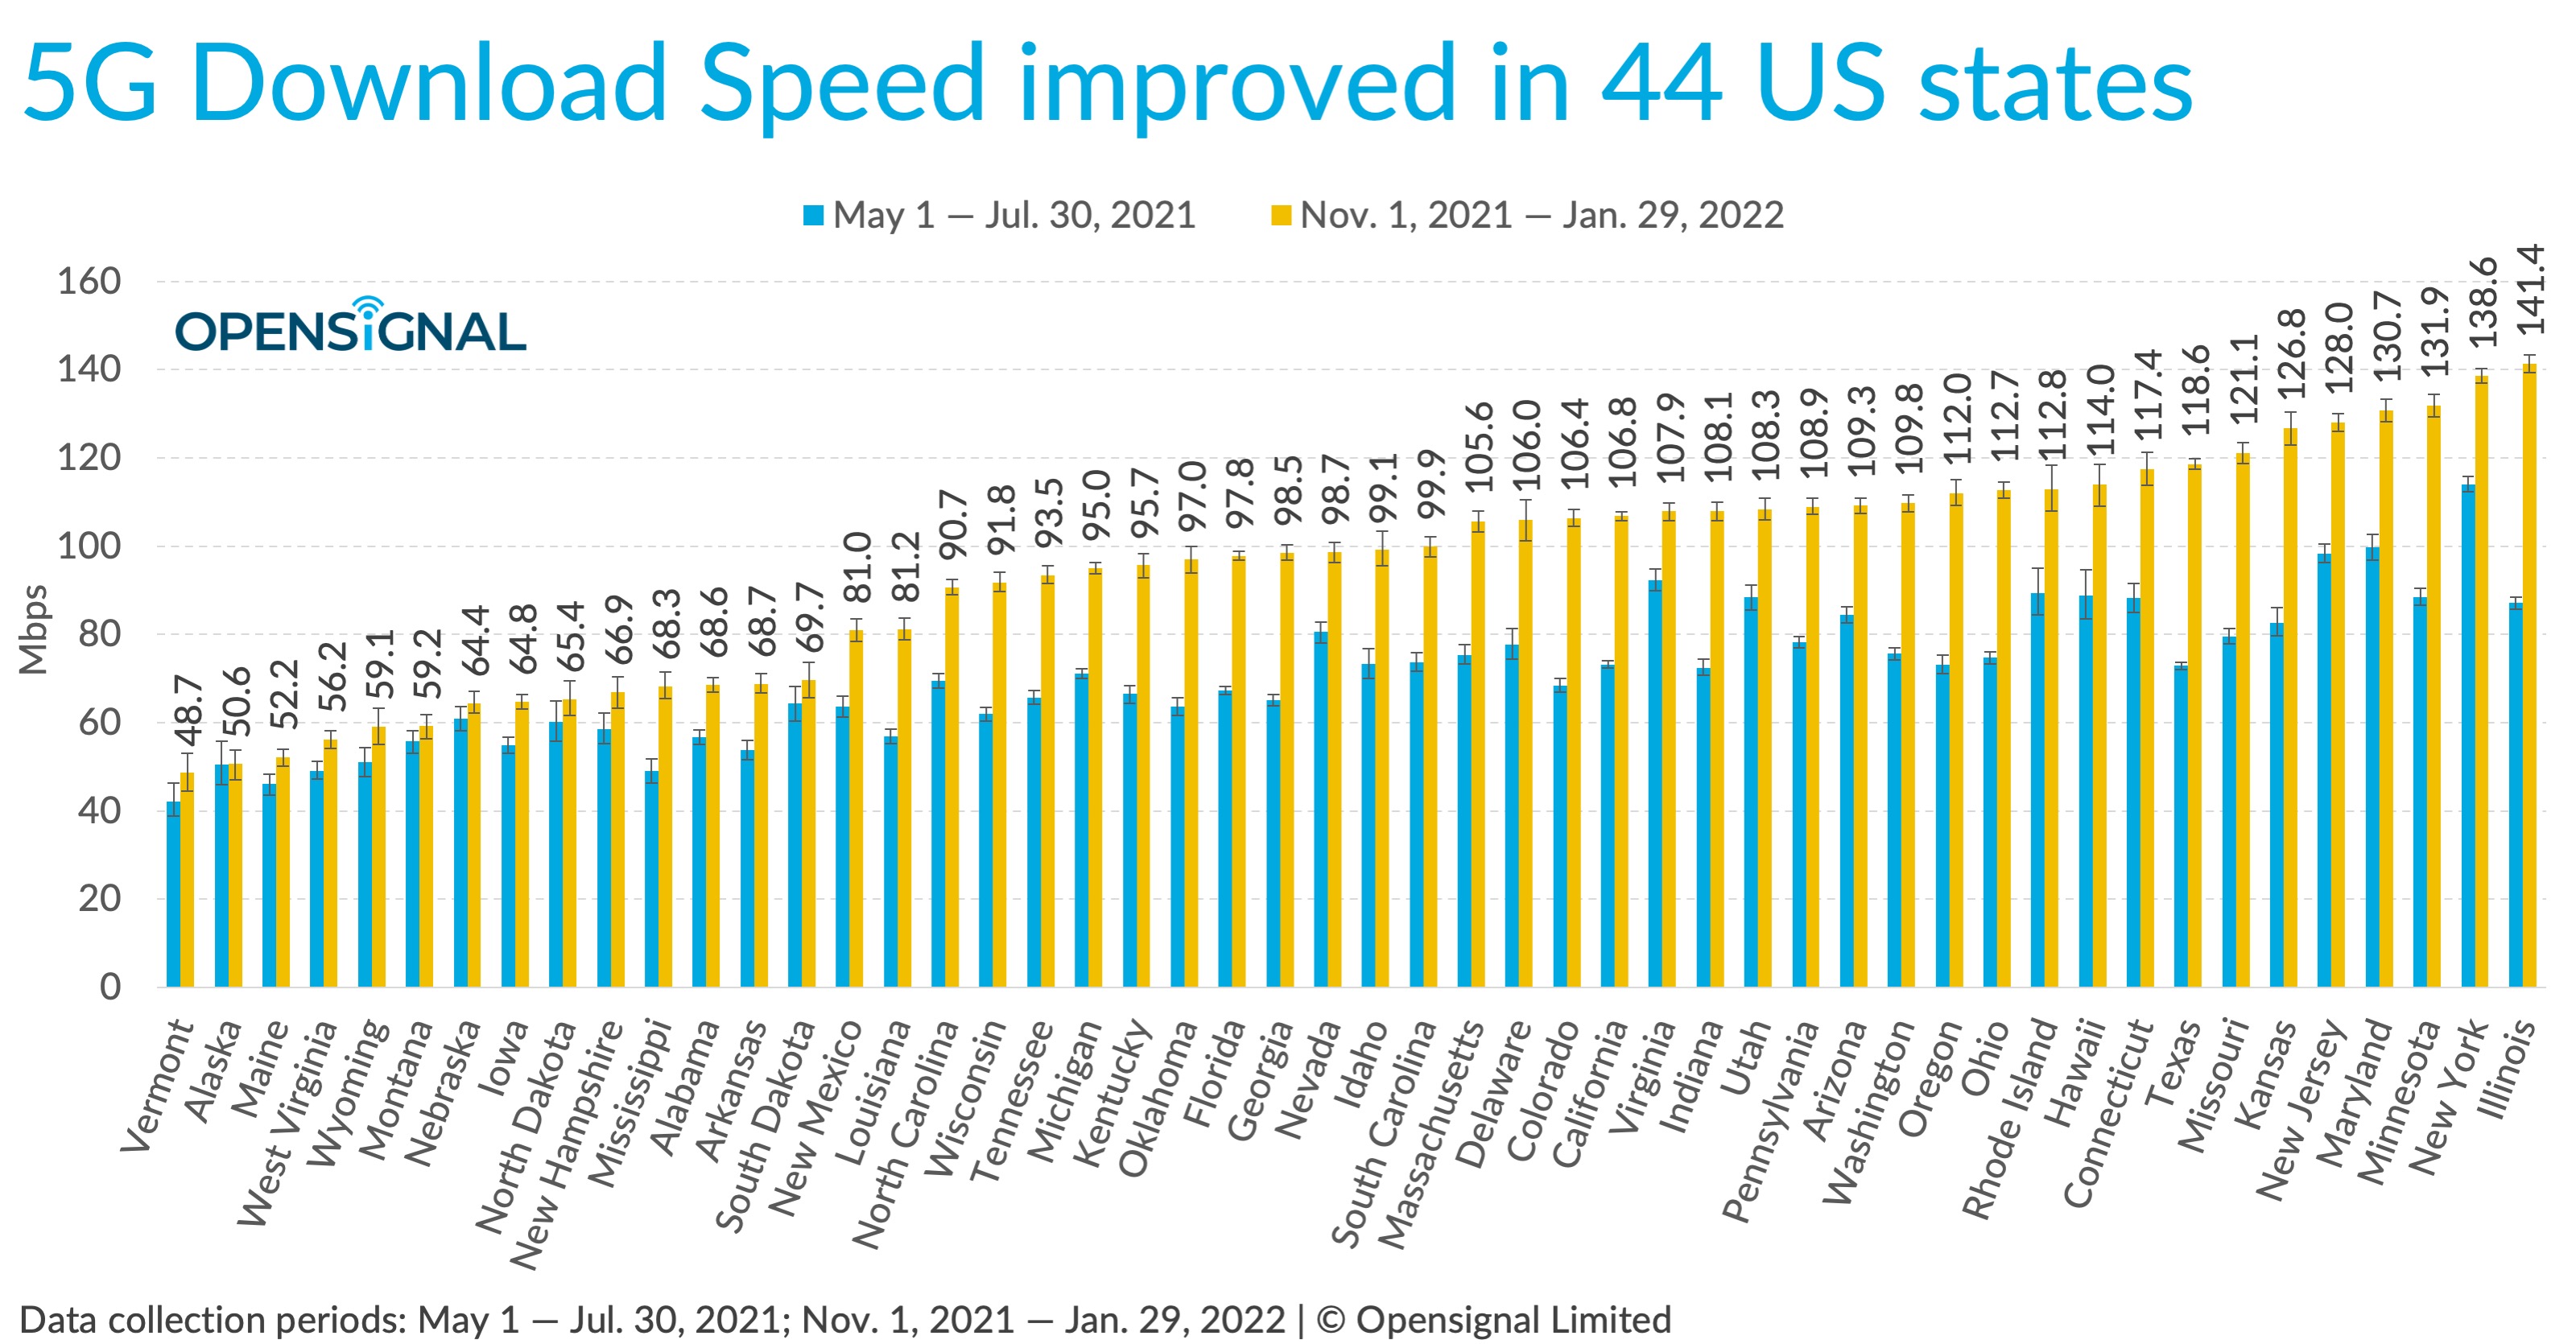 Where is the fastest 5G in the US - and the most improved 5G?